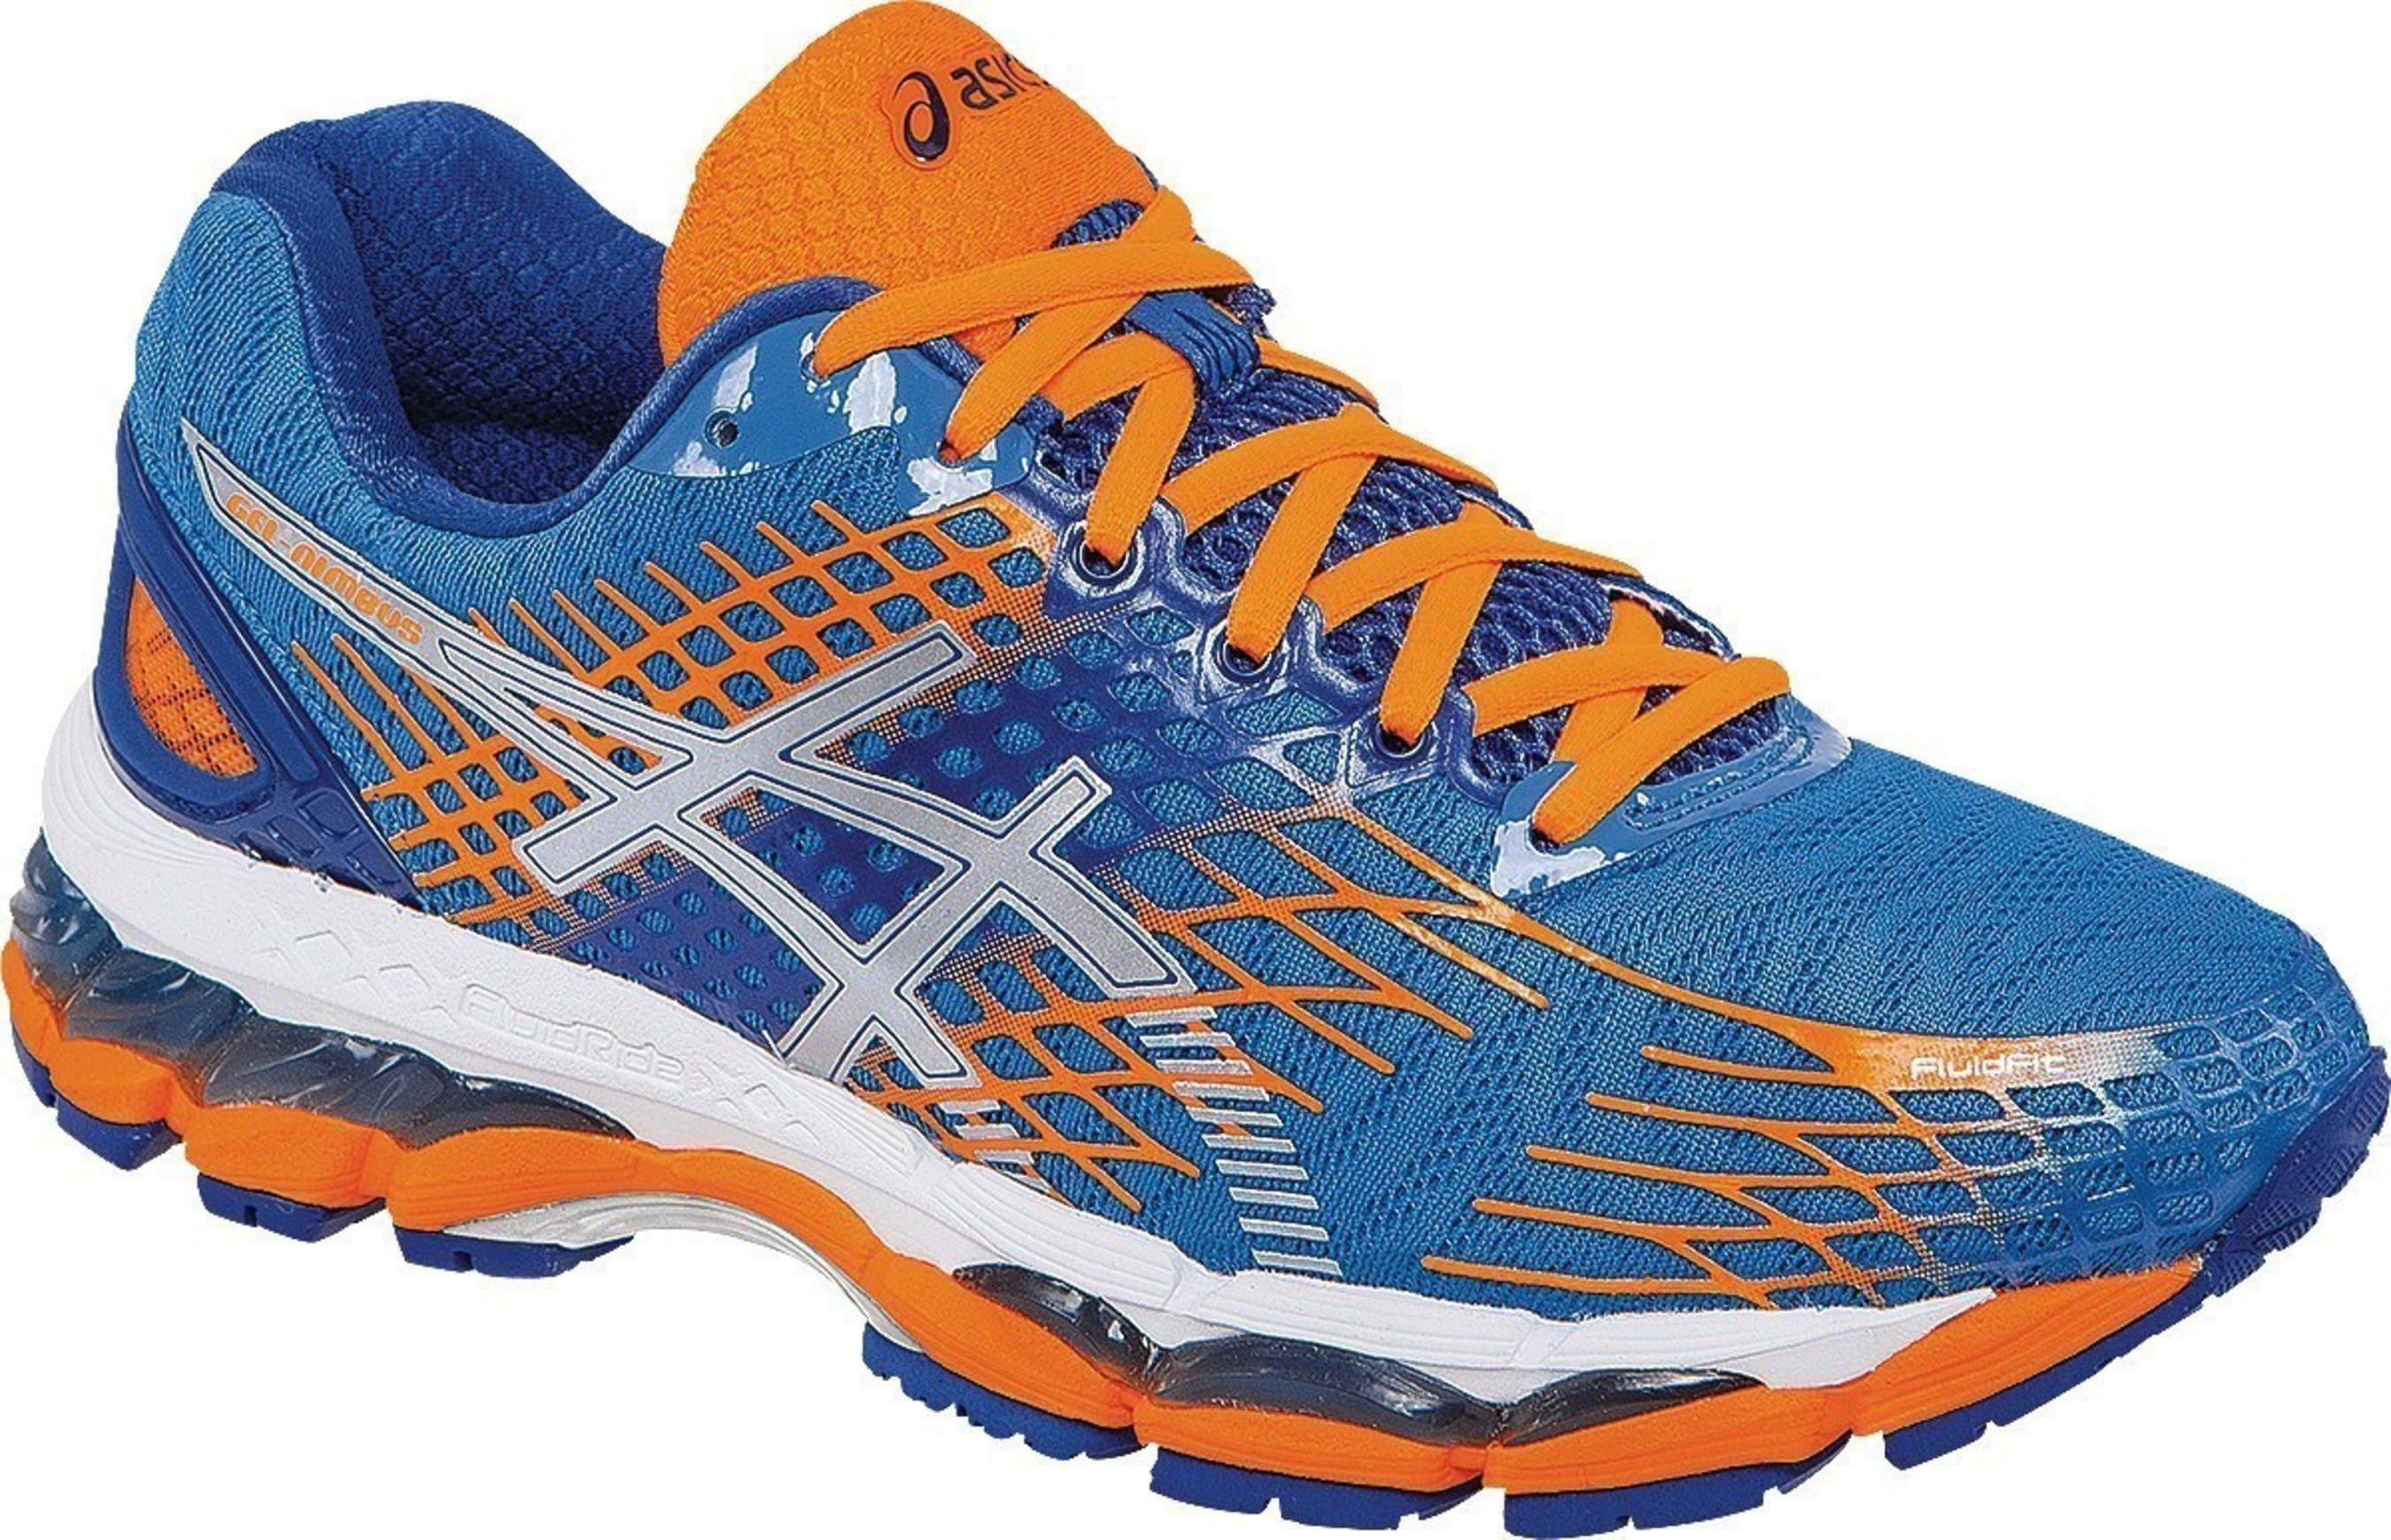 ASICS GEL-Nimbus(R) 17 received top honors from Runner's World as "Editor's Choice" in the June 2015 Summer Shoe Guide, on newsstands May 5.